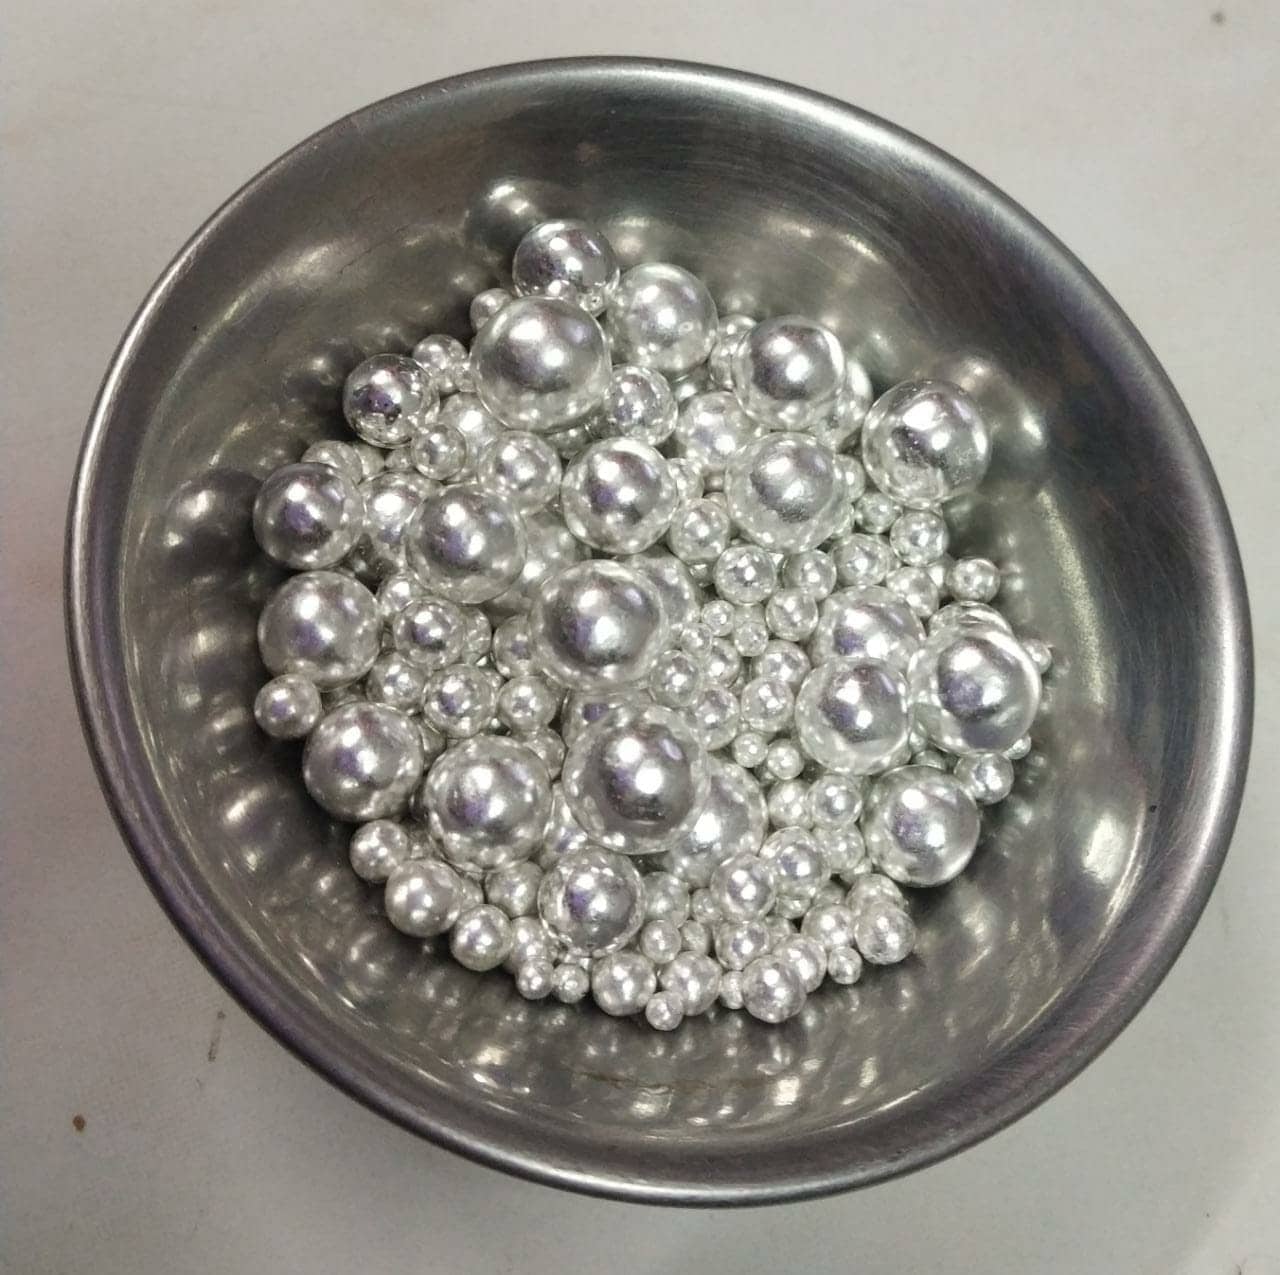 Buy Silver Balls for Cake Decorati - Lowest price in India| GlowRoad